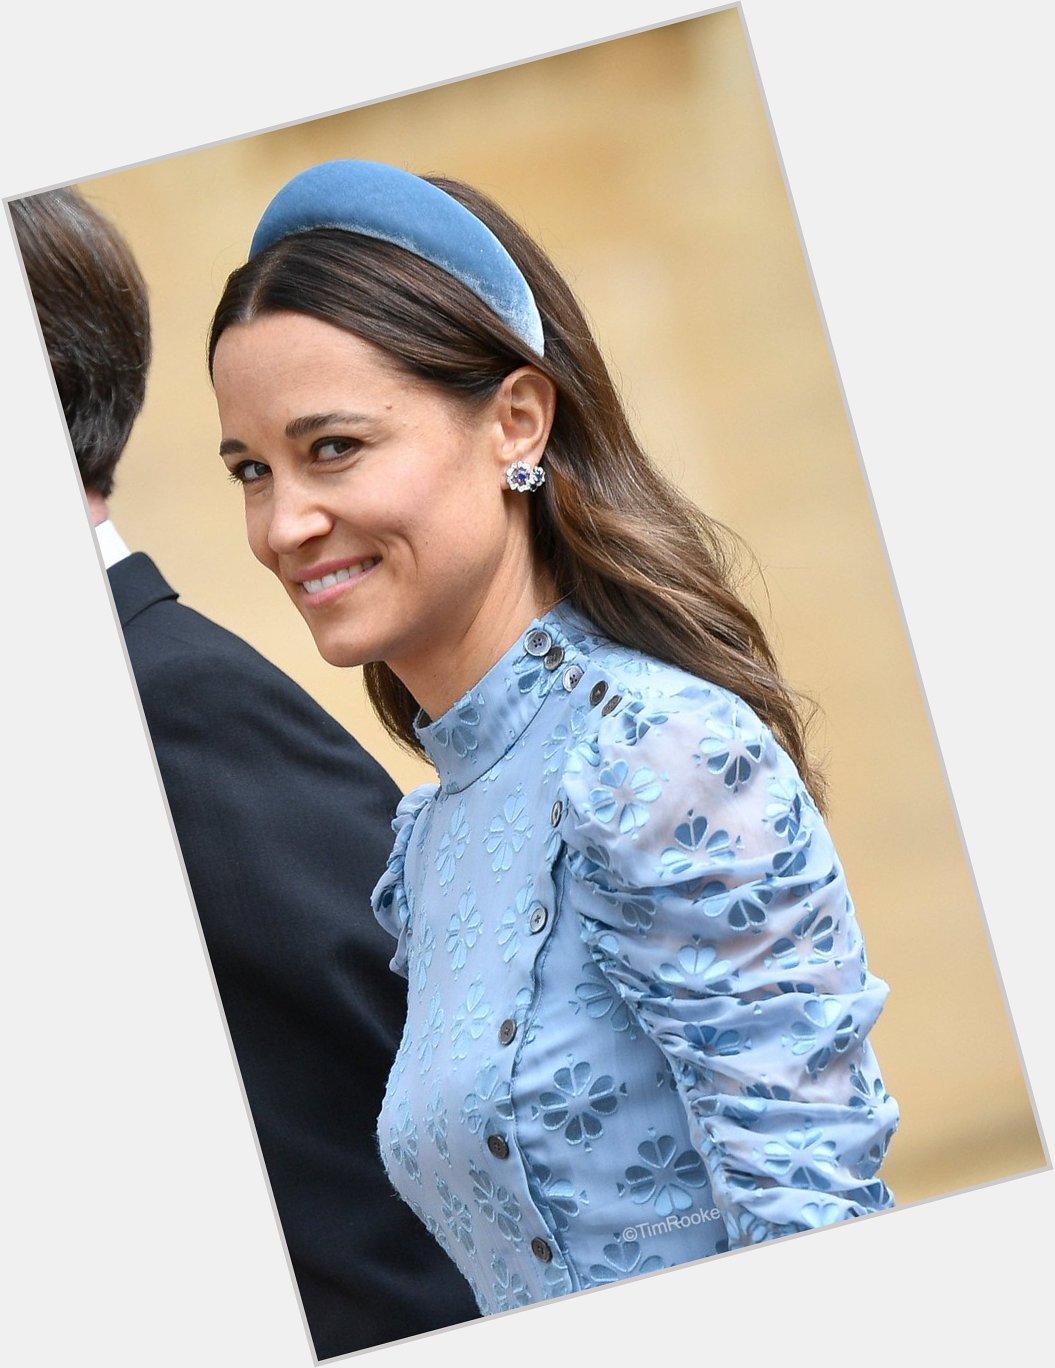 Happy Birthday to Pippa Middleton! May her birthday be as amazing as she is 